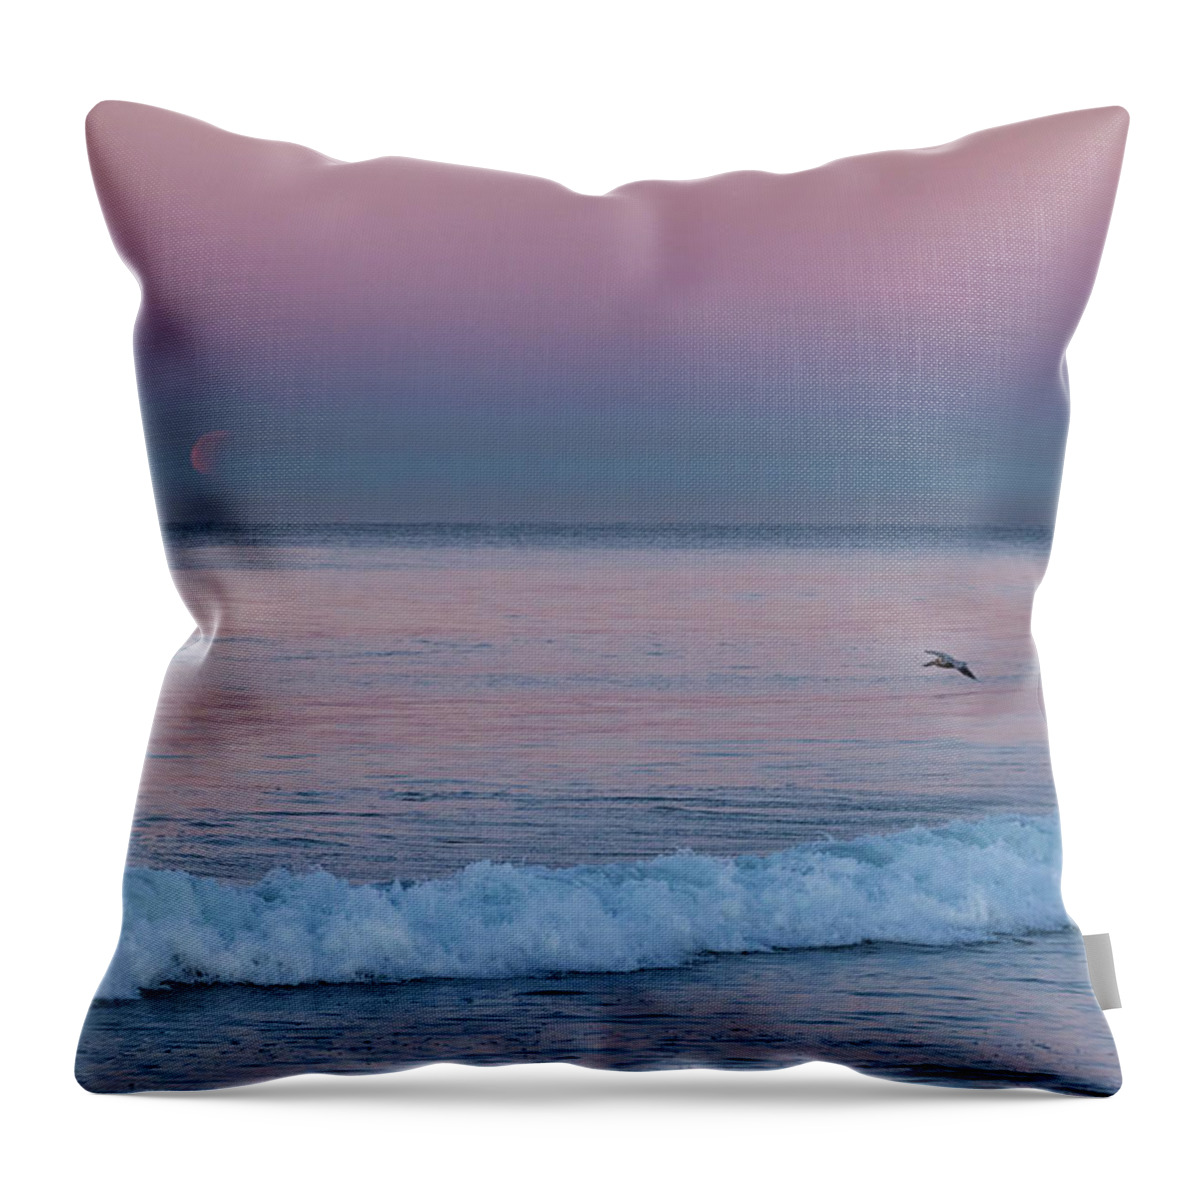 Moon Throw Pillow featuring the photograph Coastal Moonset by Jody Partin